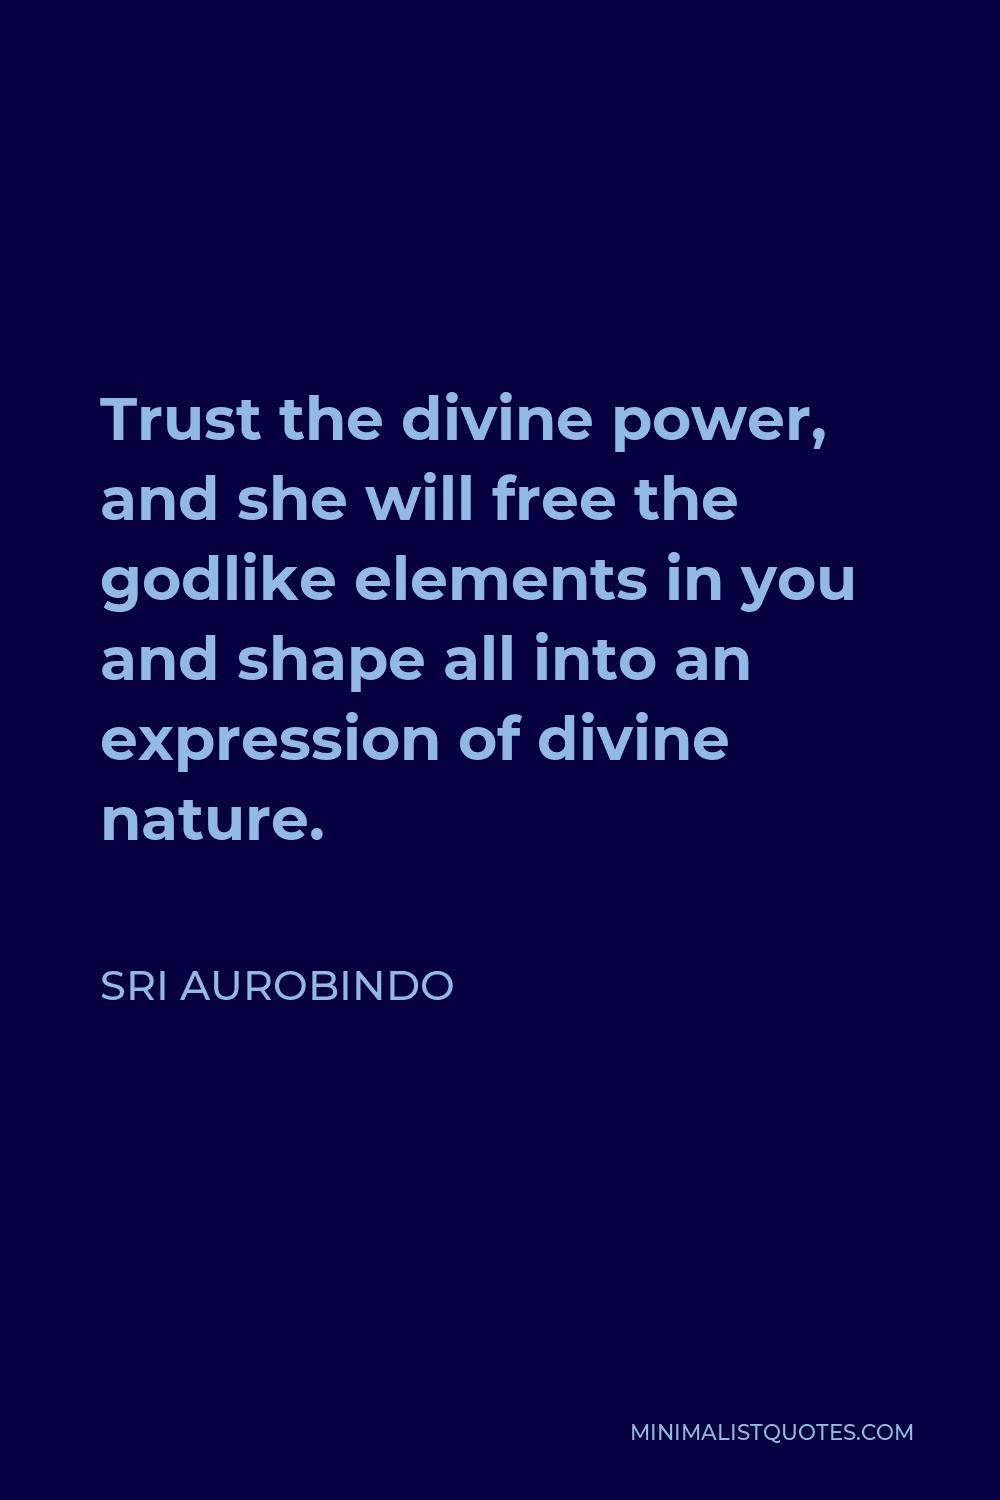 Sri Aurobindo Quote - Trust the divine power, and she will free the godlike elements in you and shape all into an expression of divine nature.